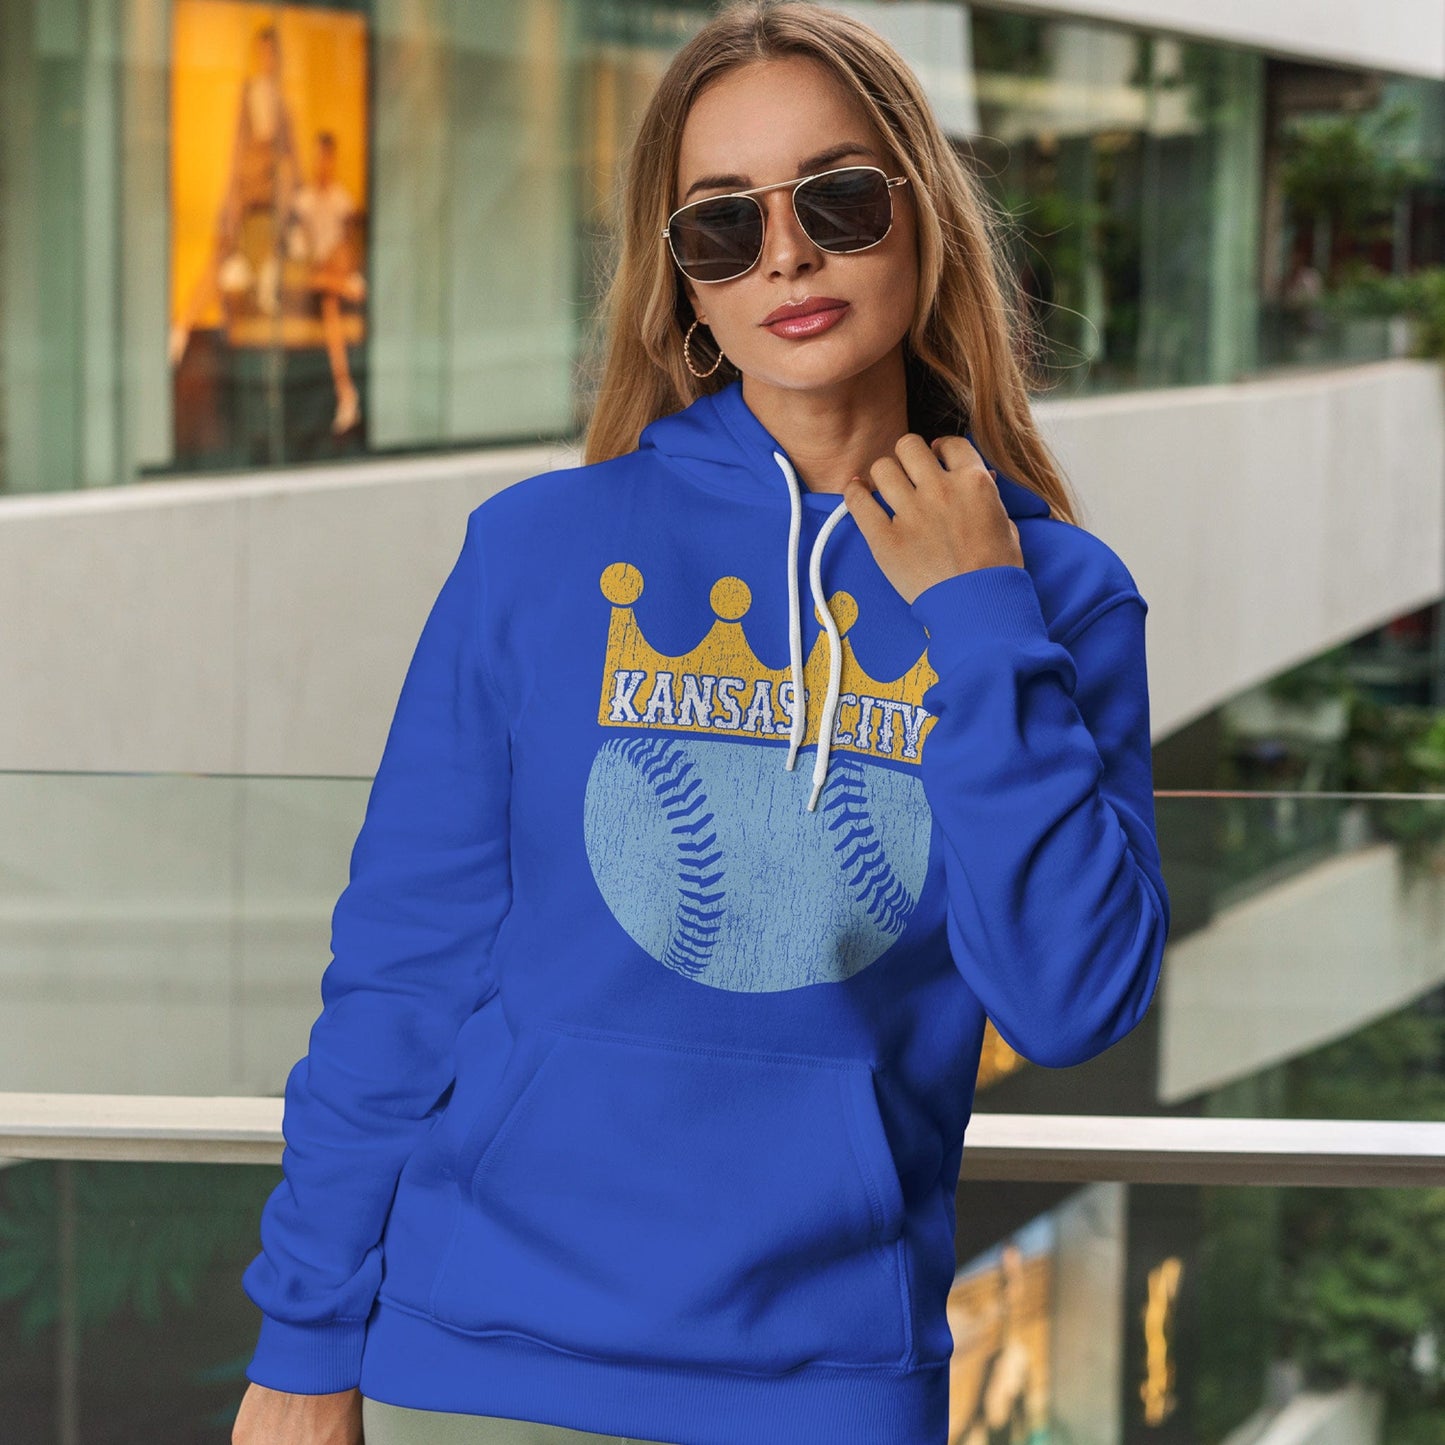 KC Swag Kansas City Royals powder blue baseball wearing a gold crown with KANSAS CITY text on royal blue pull-over hoodie worn by female model inside shopping mall